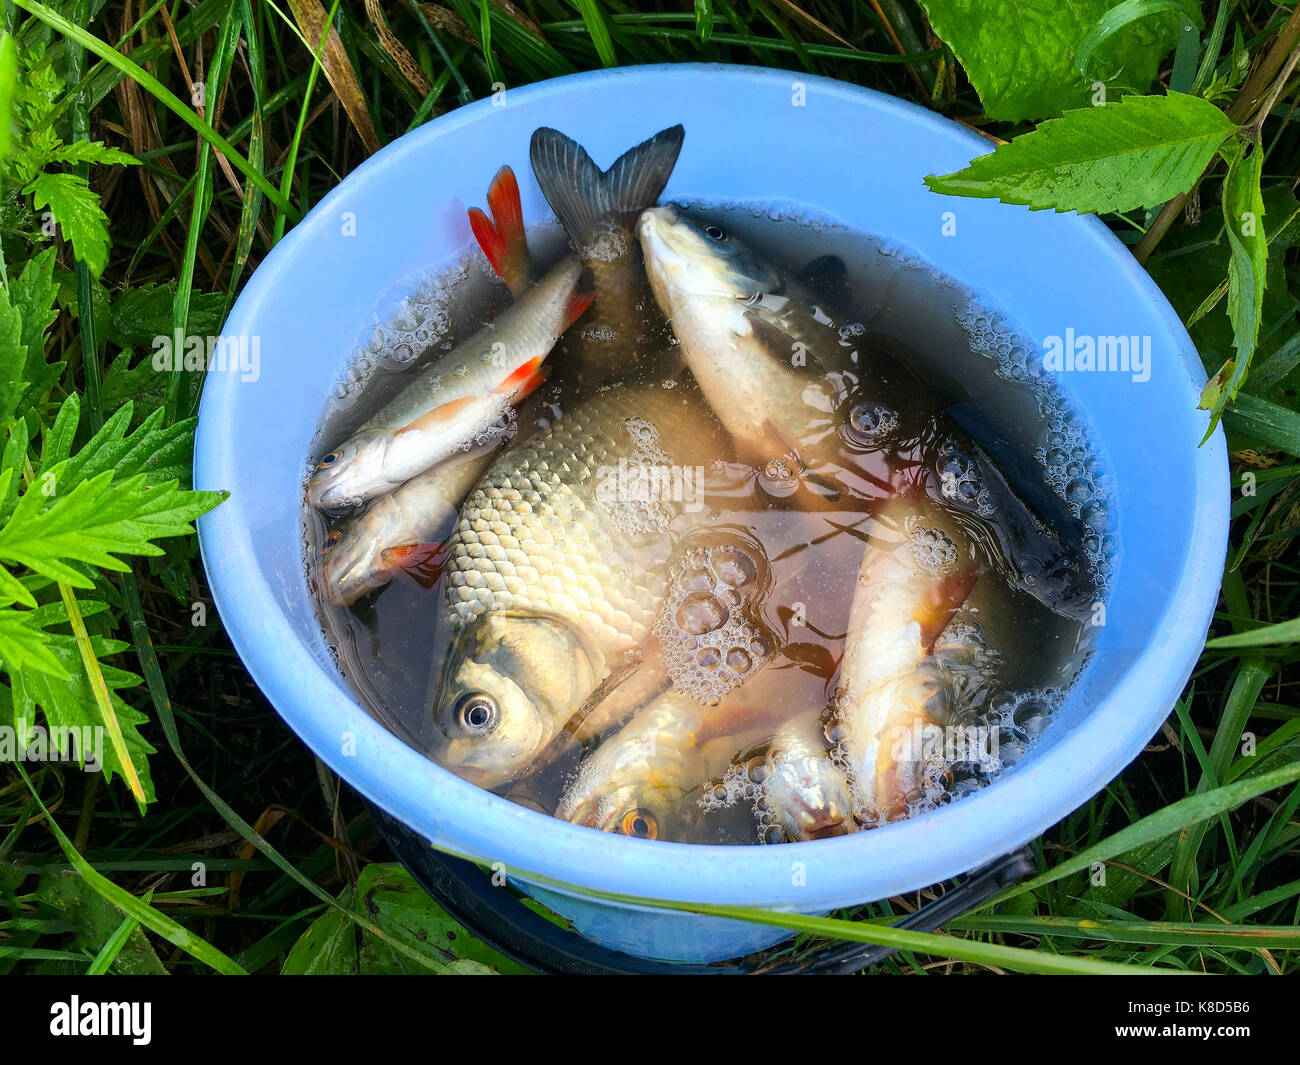 Fresh fish caught on a fishing rod in a plastic bucket Stock Photo